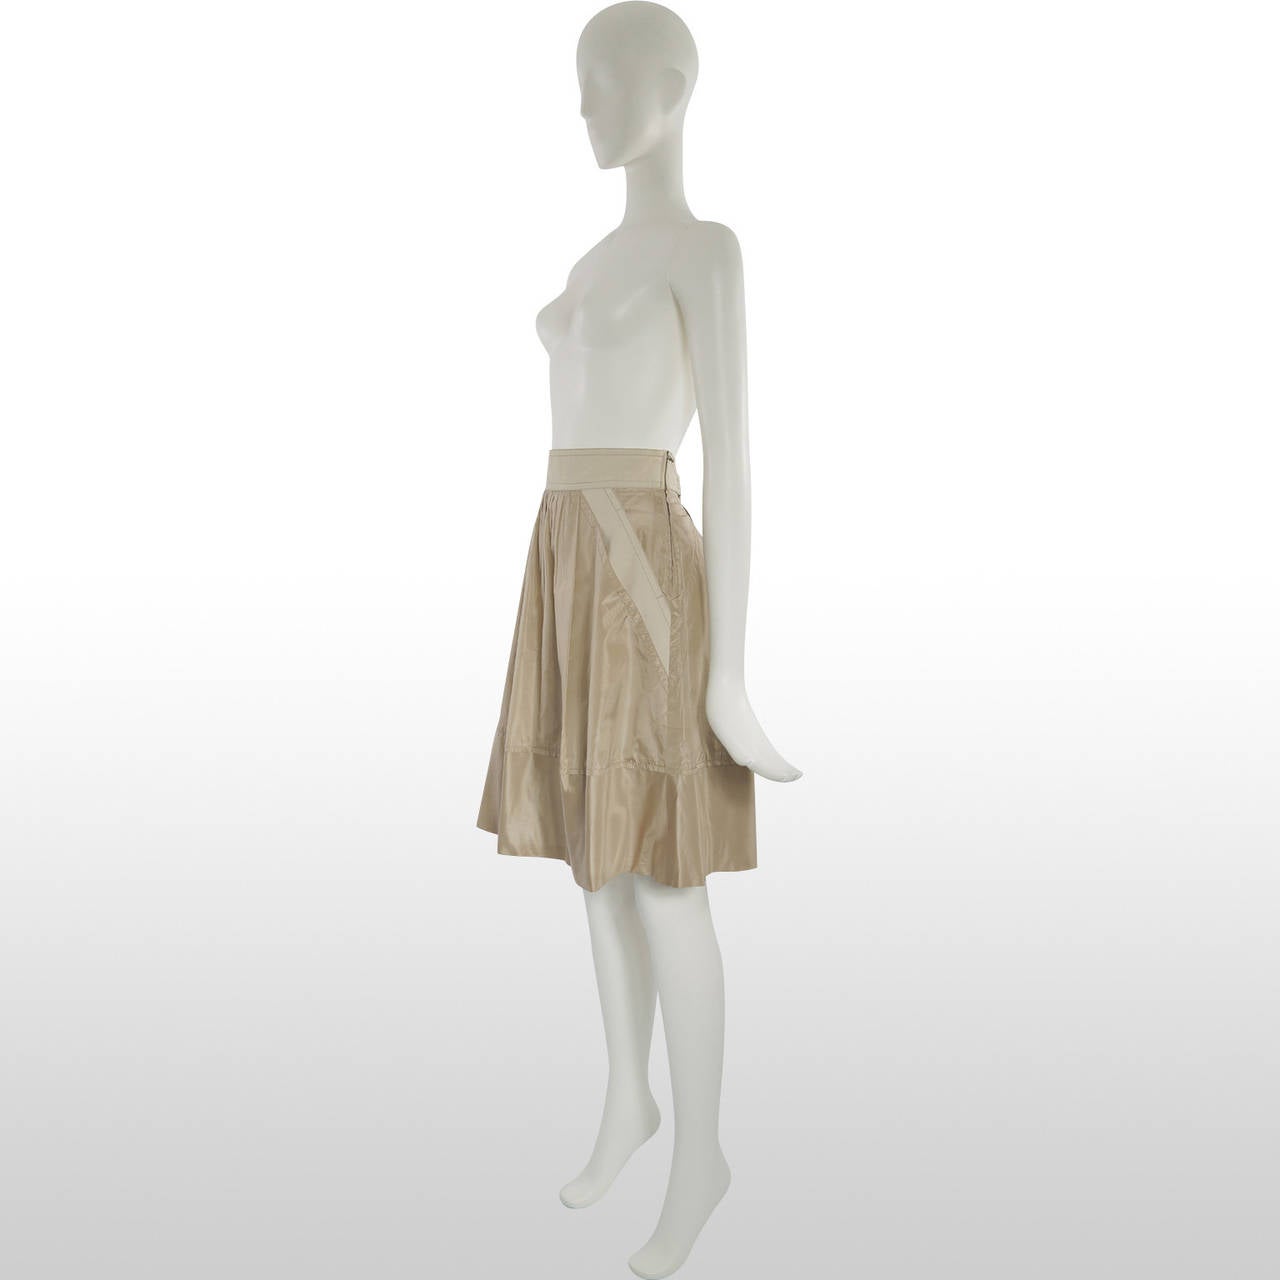 This lovely Louis Vuitton skirt forms part of our Future Vintage collection. It is made from 100% cotton in an oatmeal tone, the waistband and pocket openings are made from a matte durable woven cotton and the rest of the skirt is cotton sateen